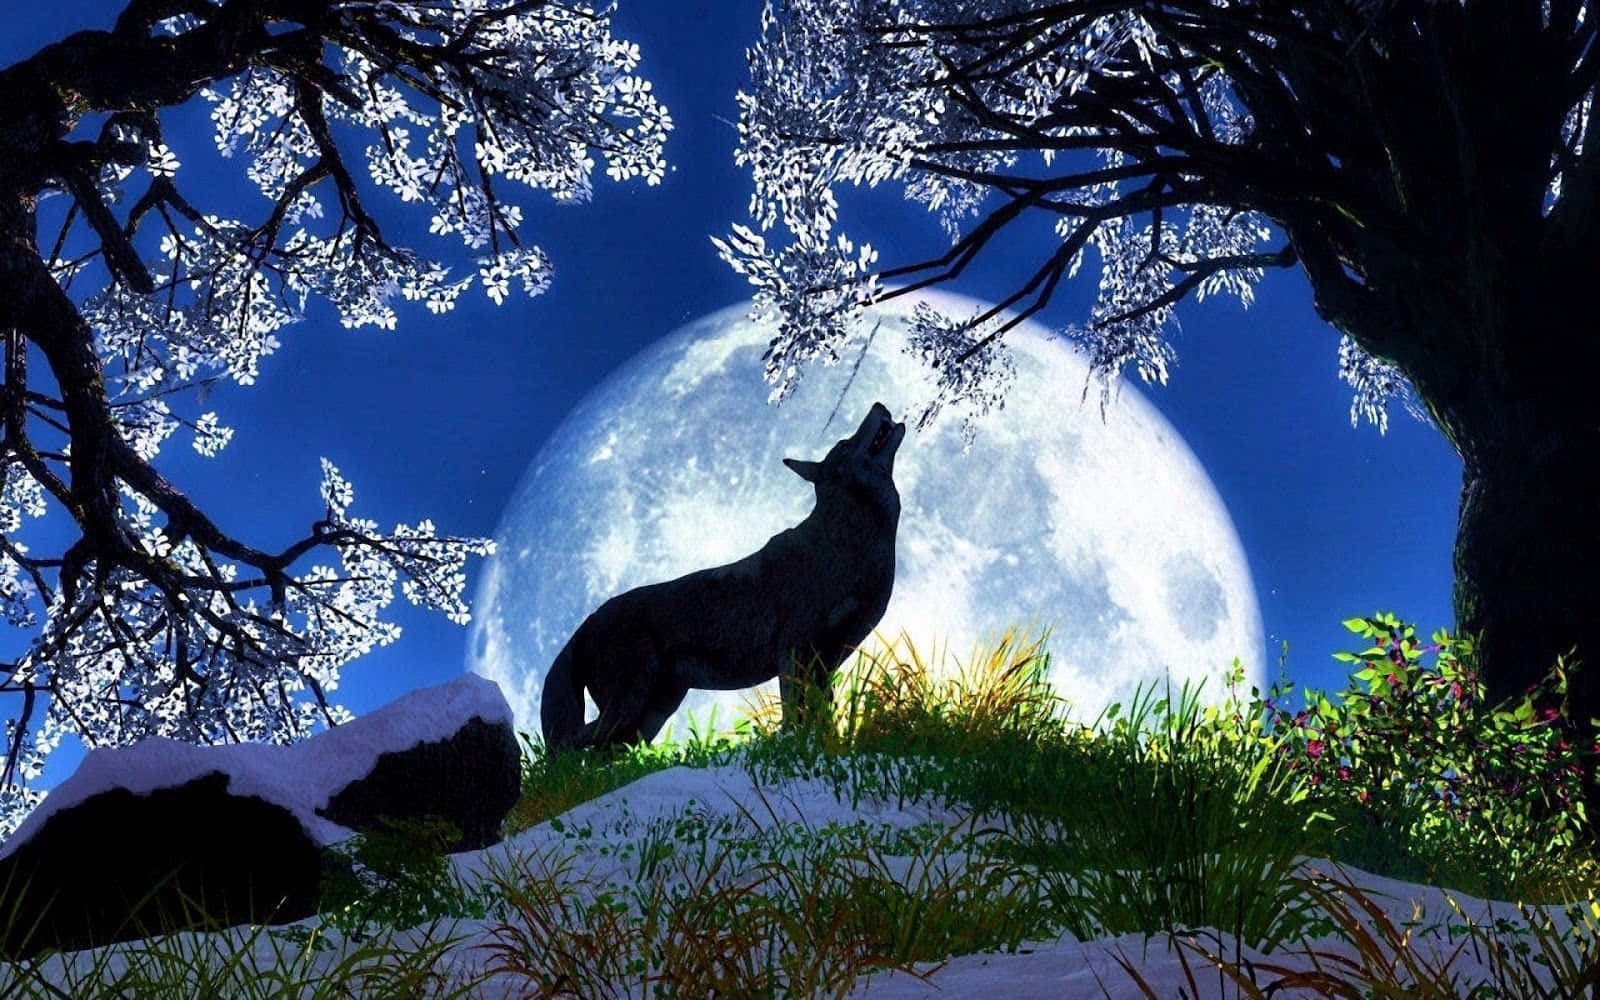 An illuminated wolf in a peaceful environment